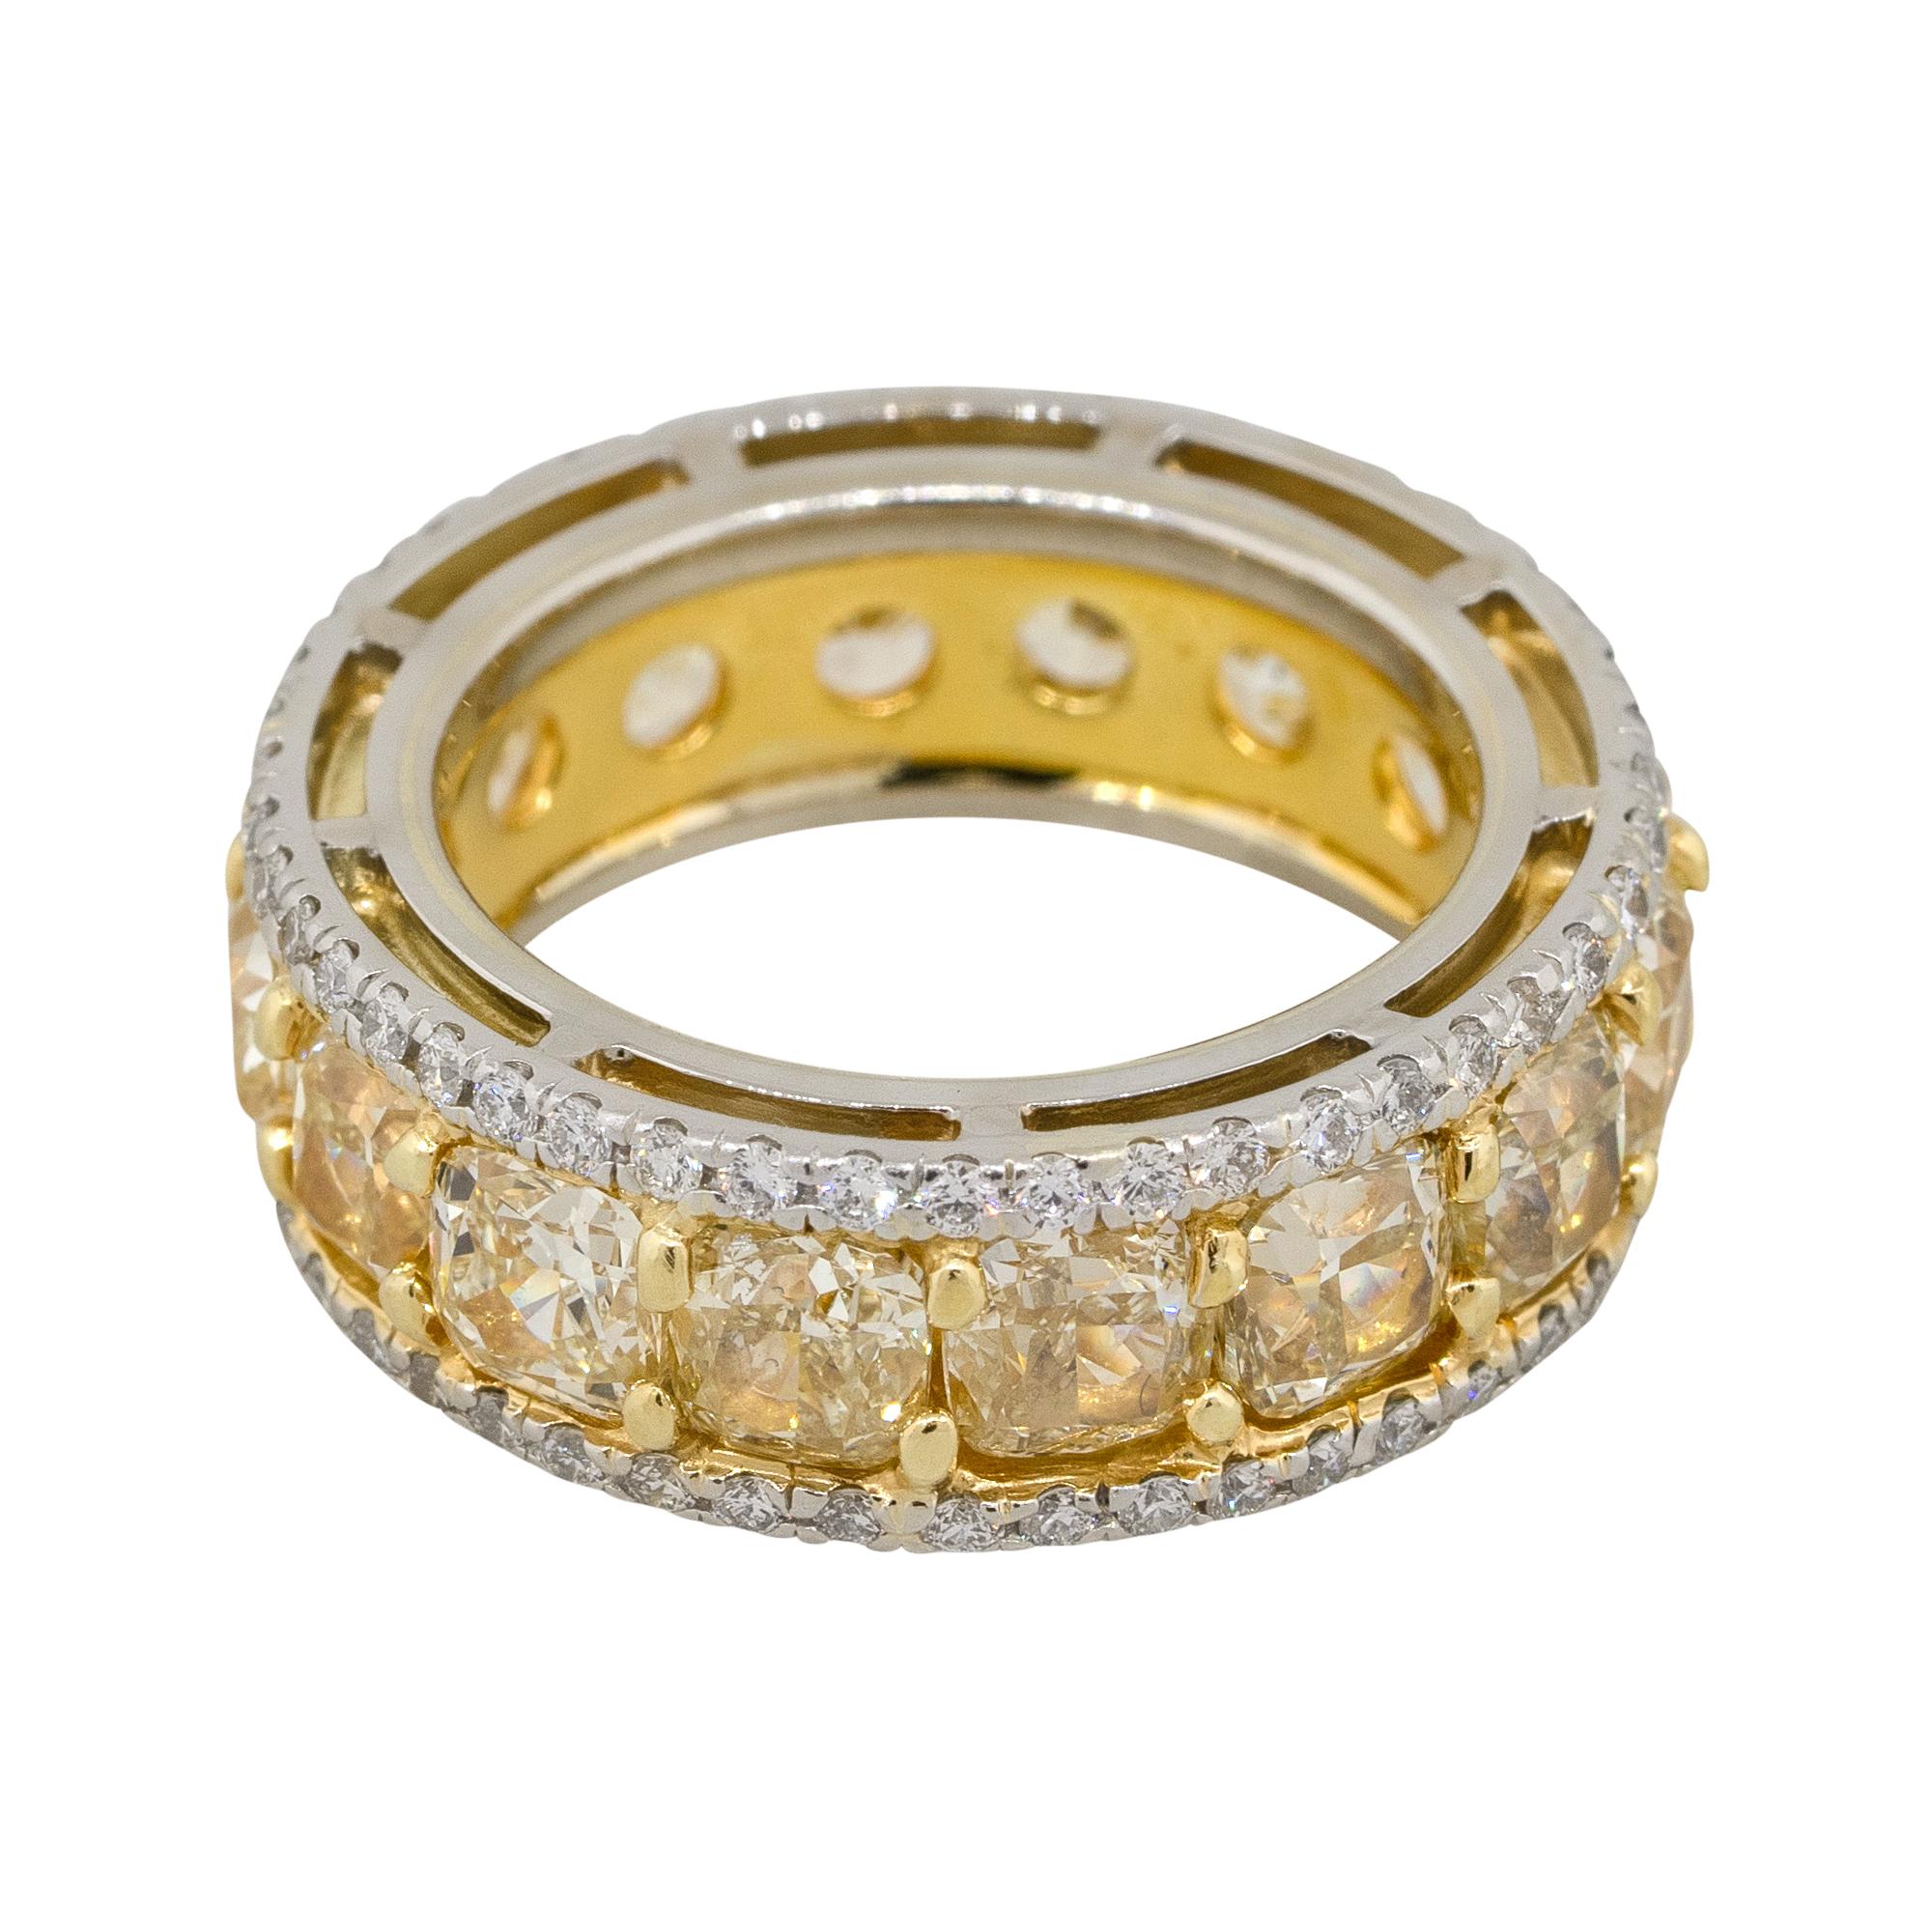 Material: Platinum & 18k yellow gold
Center Row Diamond Details: Approx. 7.86ctw of radiant cut Diamonds. Diamonds are Fancy Yellow in color and VS in clarity
Adjacent Diamond Details: Approx. 2.48ctw of round brilliant Diamonds. Diamonds are G/H in